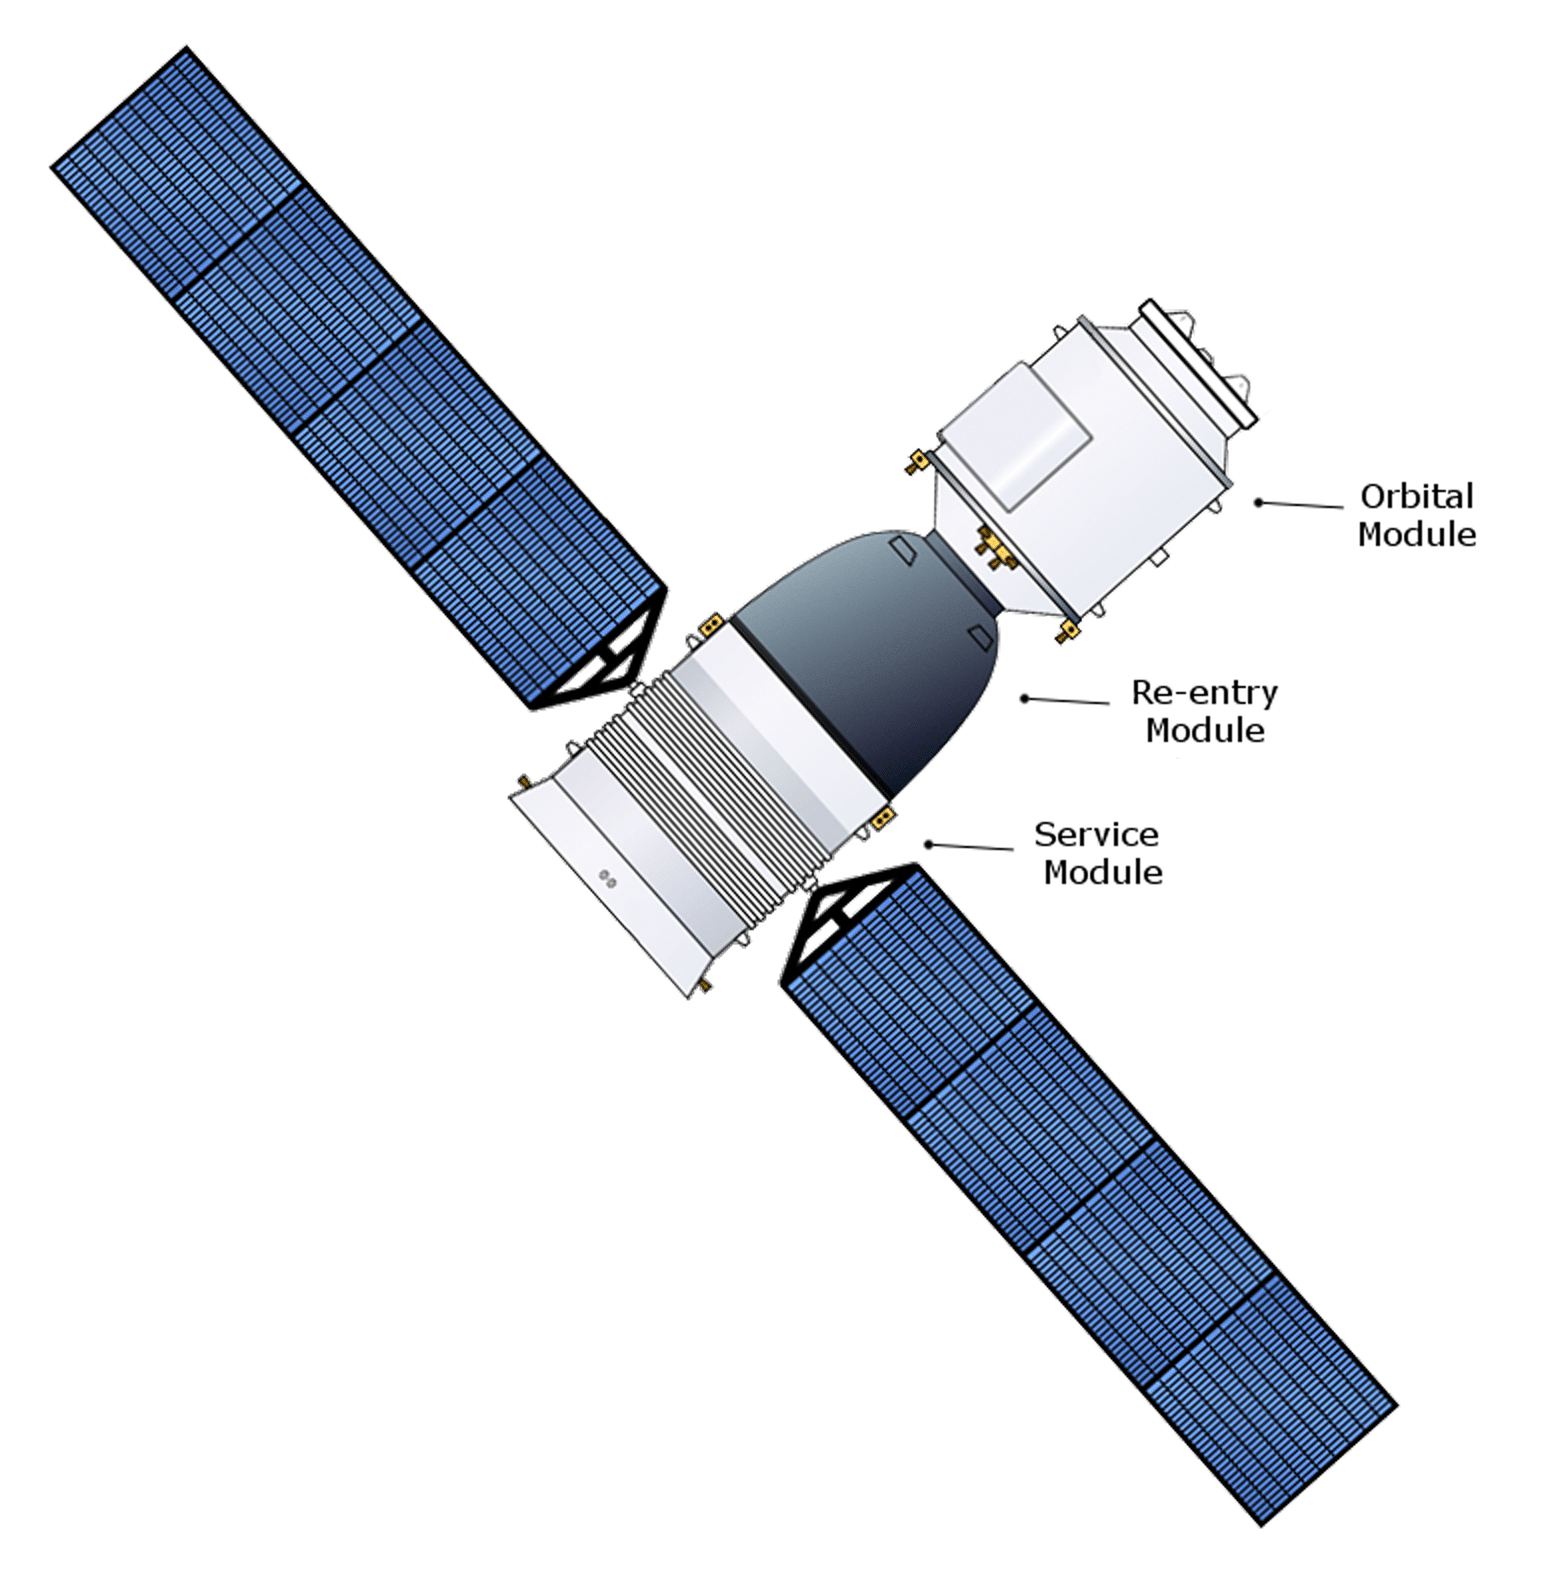 diagram of the spacecraft showing location of orbital module, re-entry module, service module